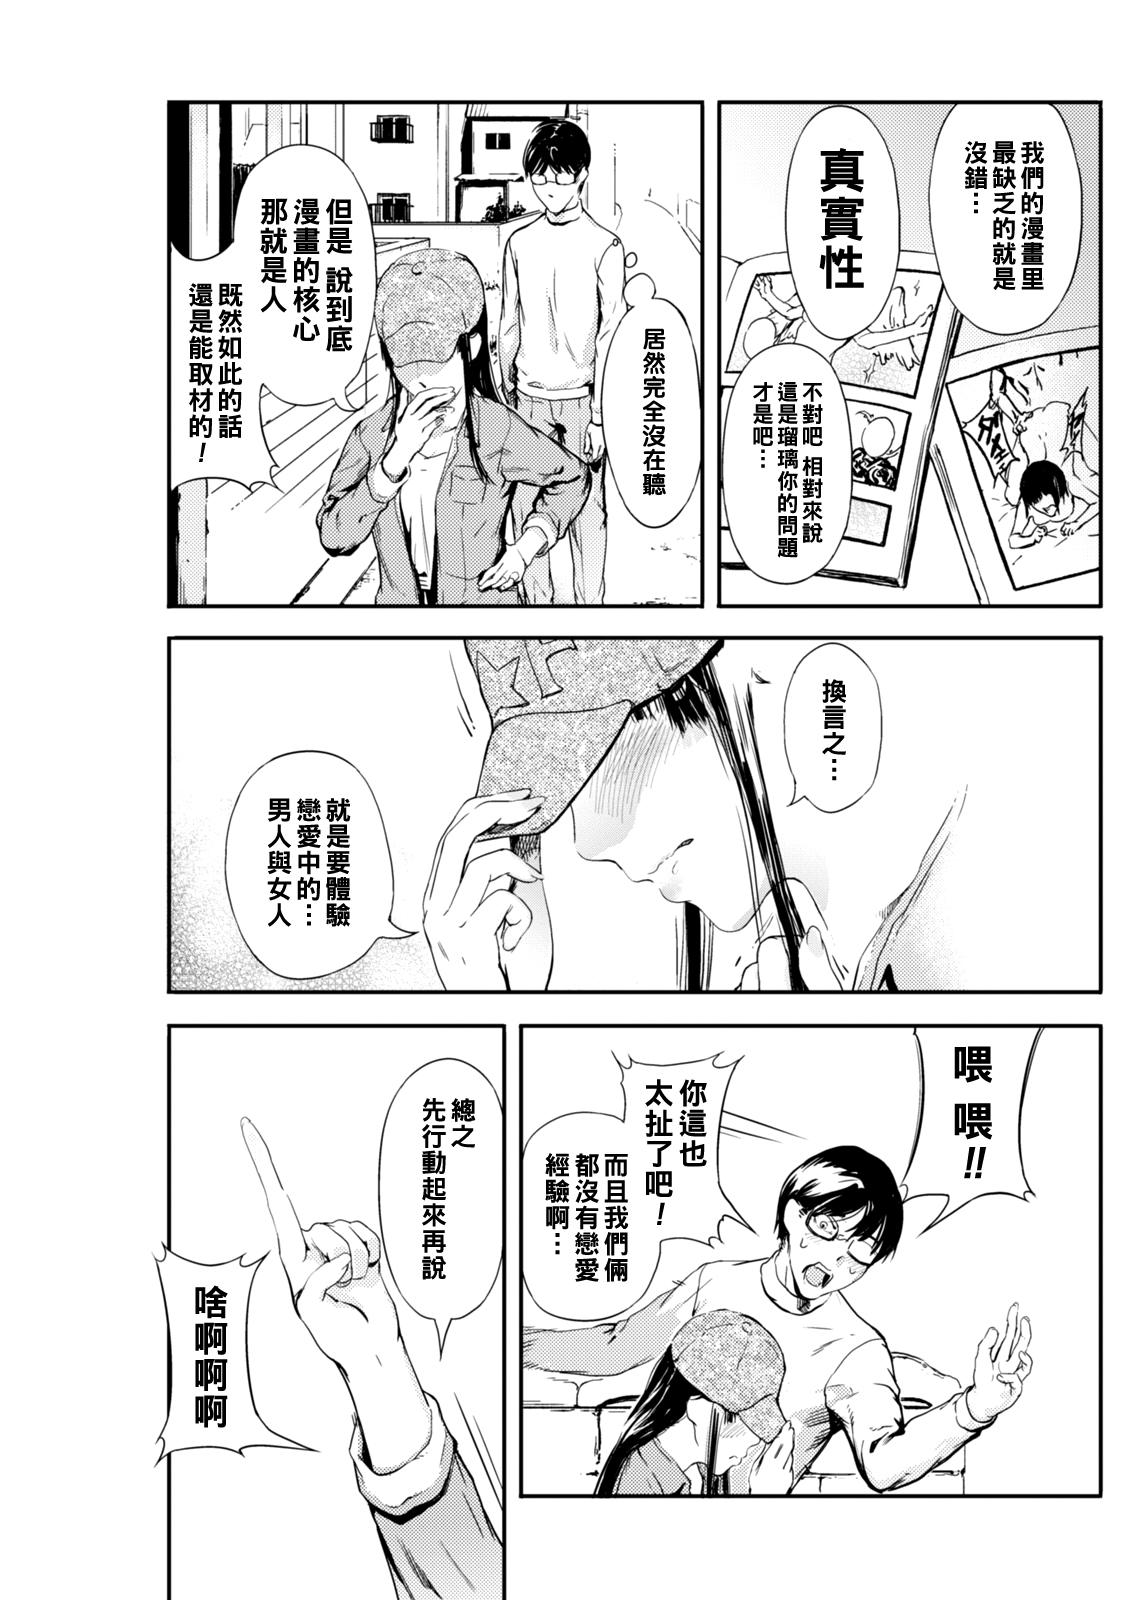 Anal Play 漫画ガール（Chinese） Tanned - Picture 3